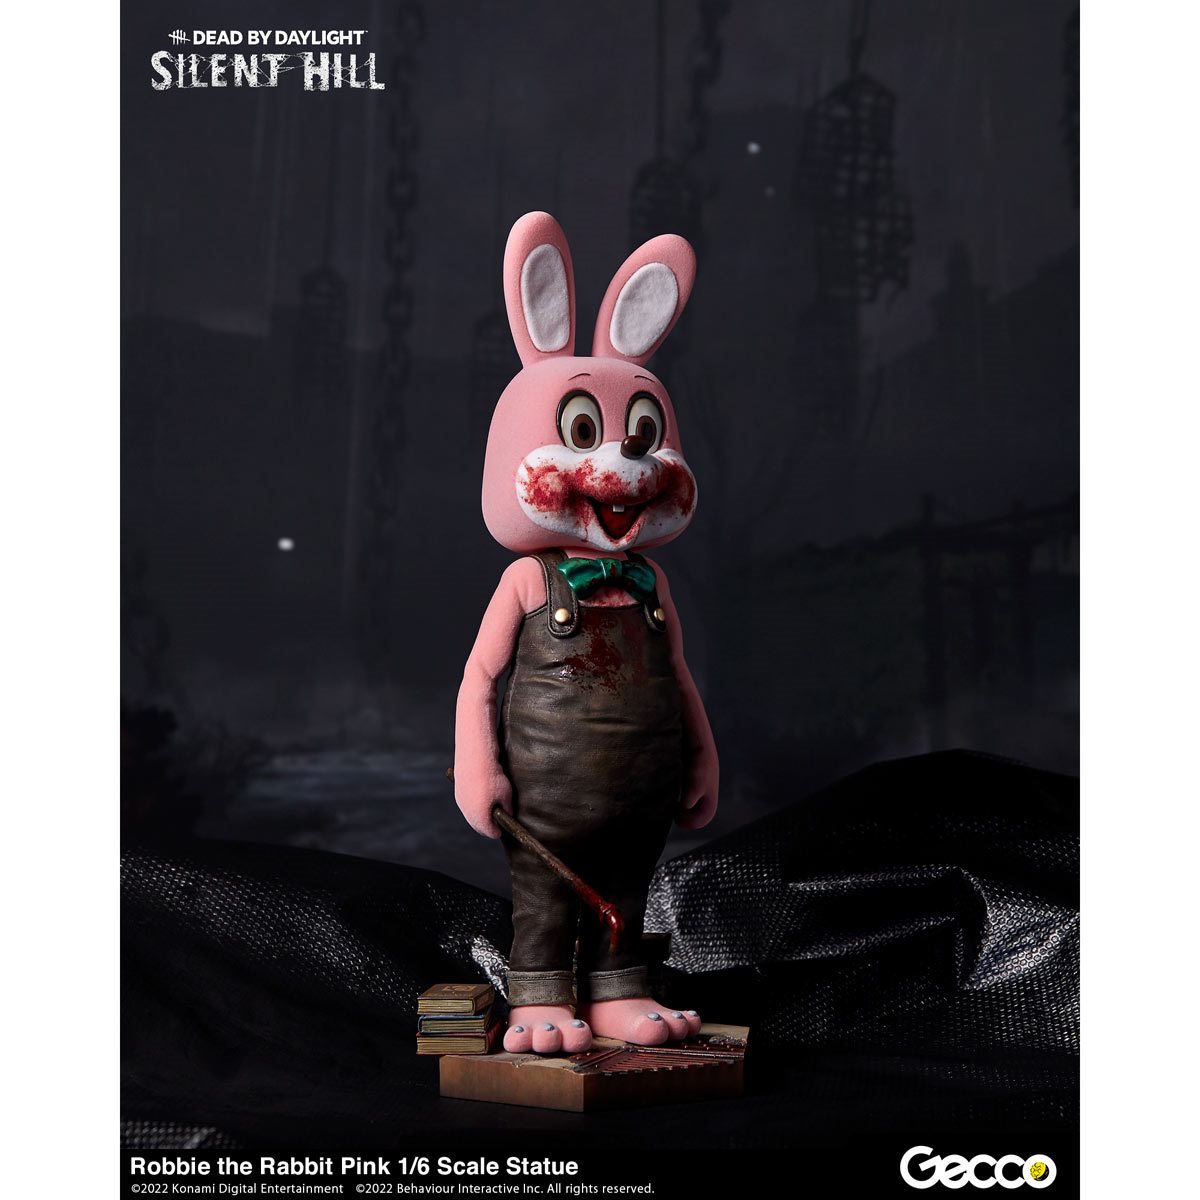 SILENT HILL x Dead by Daylight, Robbie the Rabbit Pink 1/6 Scale